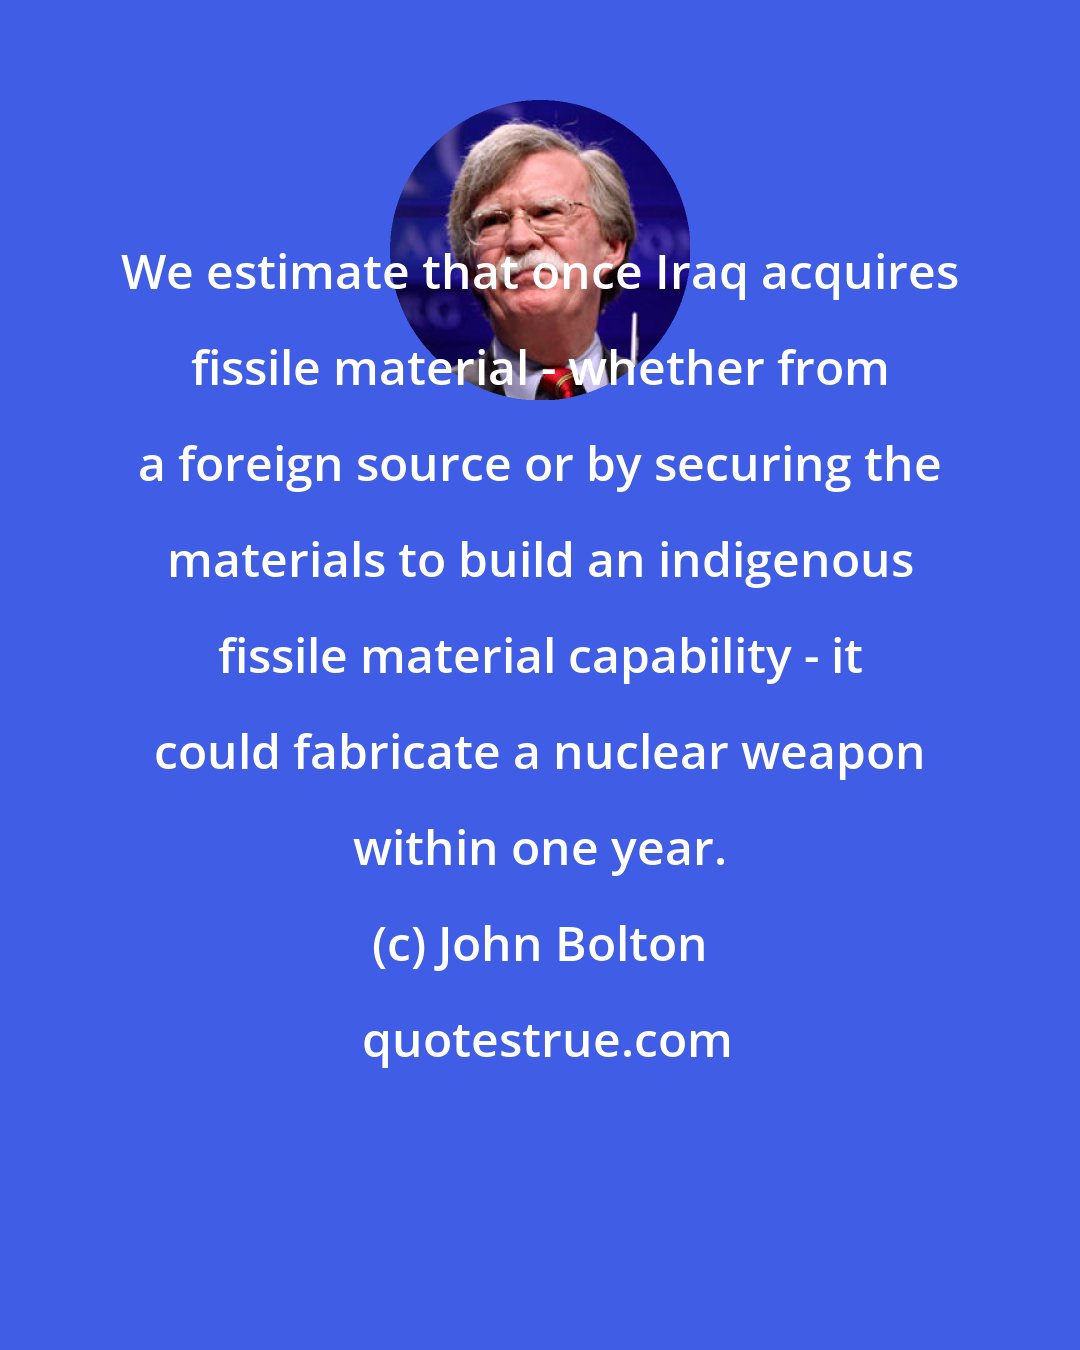 John Bolton: We estimate that once Iraq acquires fissile material - whether from a foreign source or by securing the materials to build an indigenous fissile material capability - it could fabricate a nuclear weapon within one year.